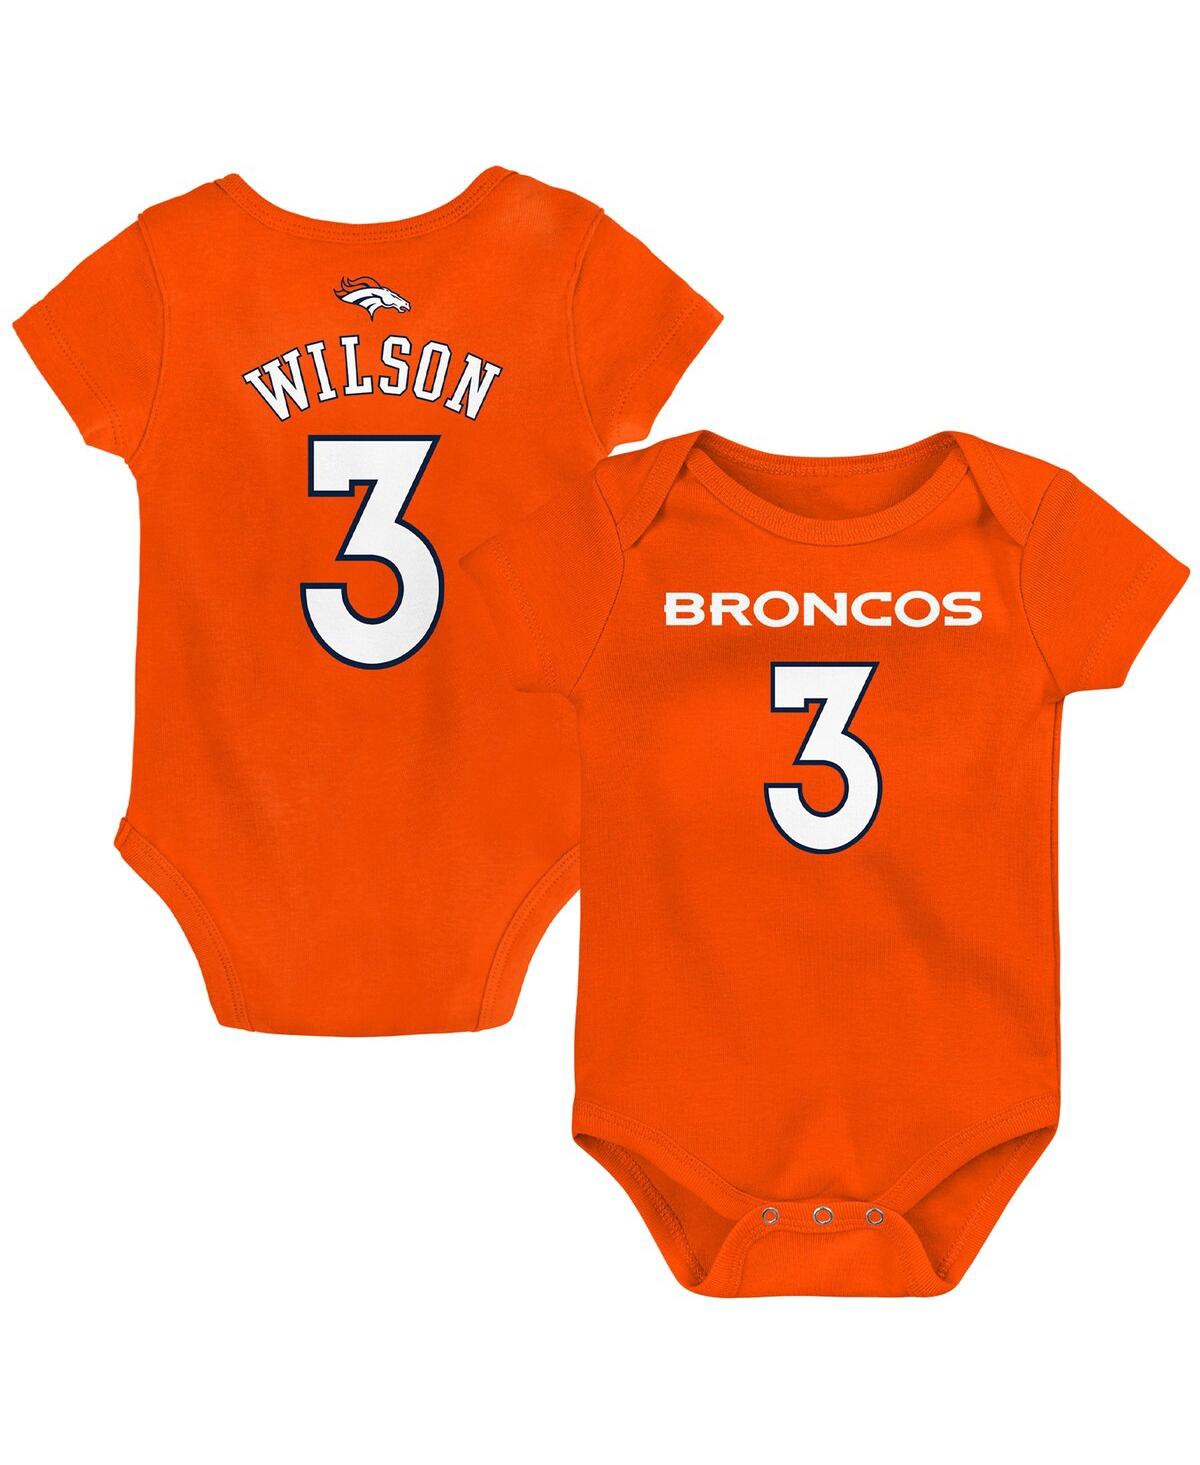 Shop Outerstuff Newborn And Infant Boys And Girls Russell Wilson Orange Denver Broncos Mainliner Player Name And Num